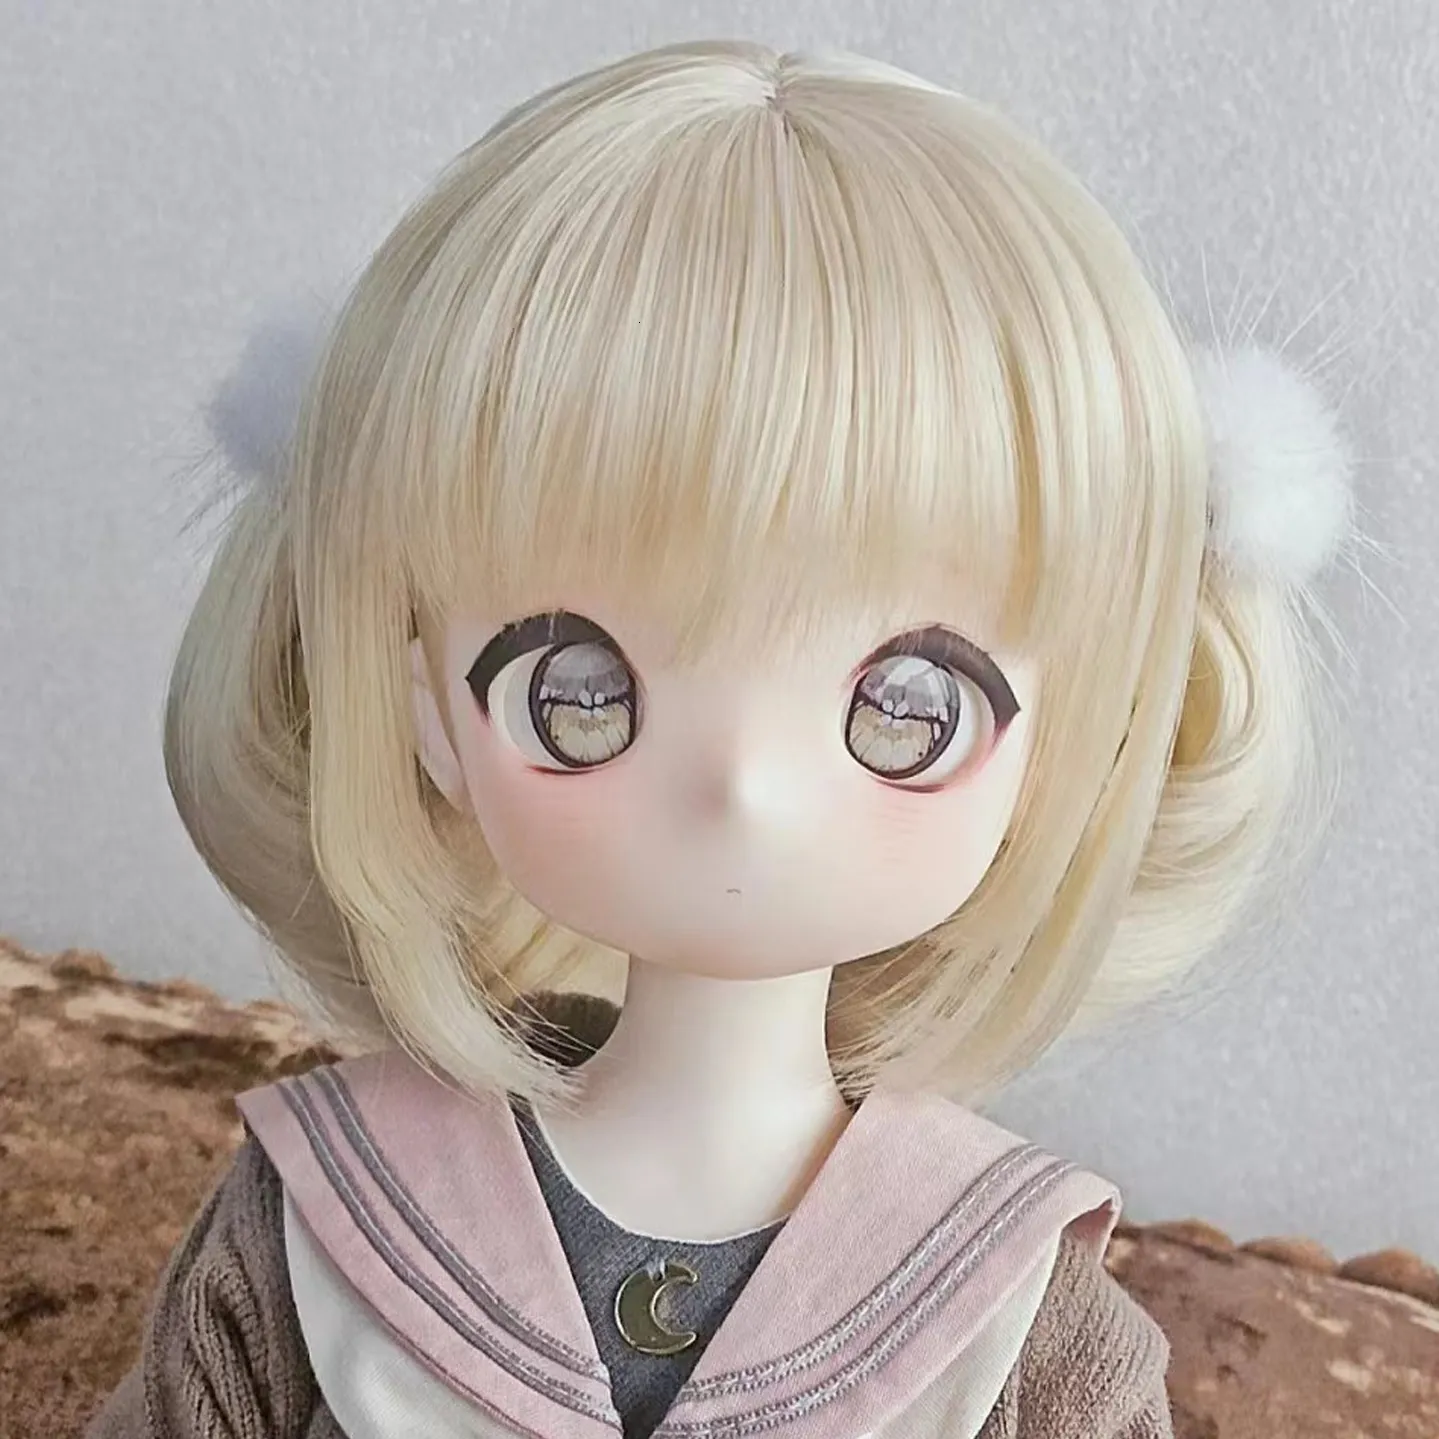 Doll Accessories, Makeup Doll Head, Girls Toys